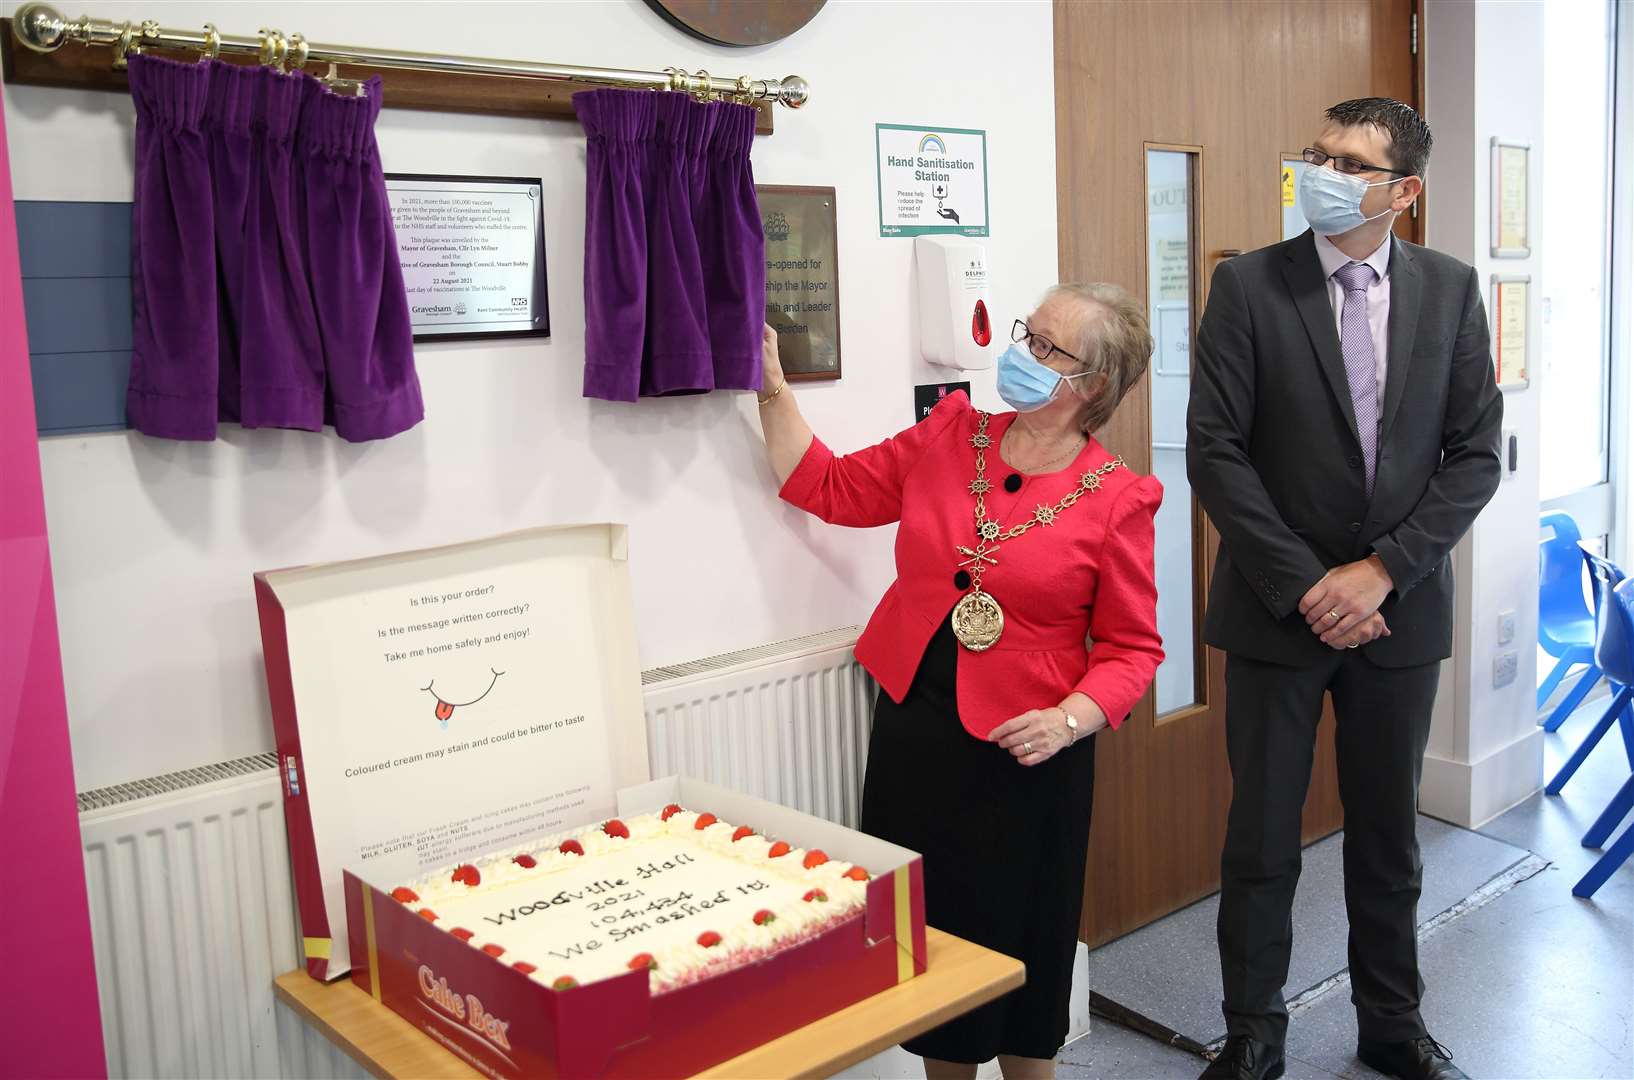 The Mayor of Gravesham, Cllr Lyn Milner, unveils the plaque commemorating The Woodville’s role in the Covid-19 vaccination programme, watched by Stuart Bobby, the chief executive of Gravesham Borough Council. Picture: Gravesham council